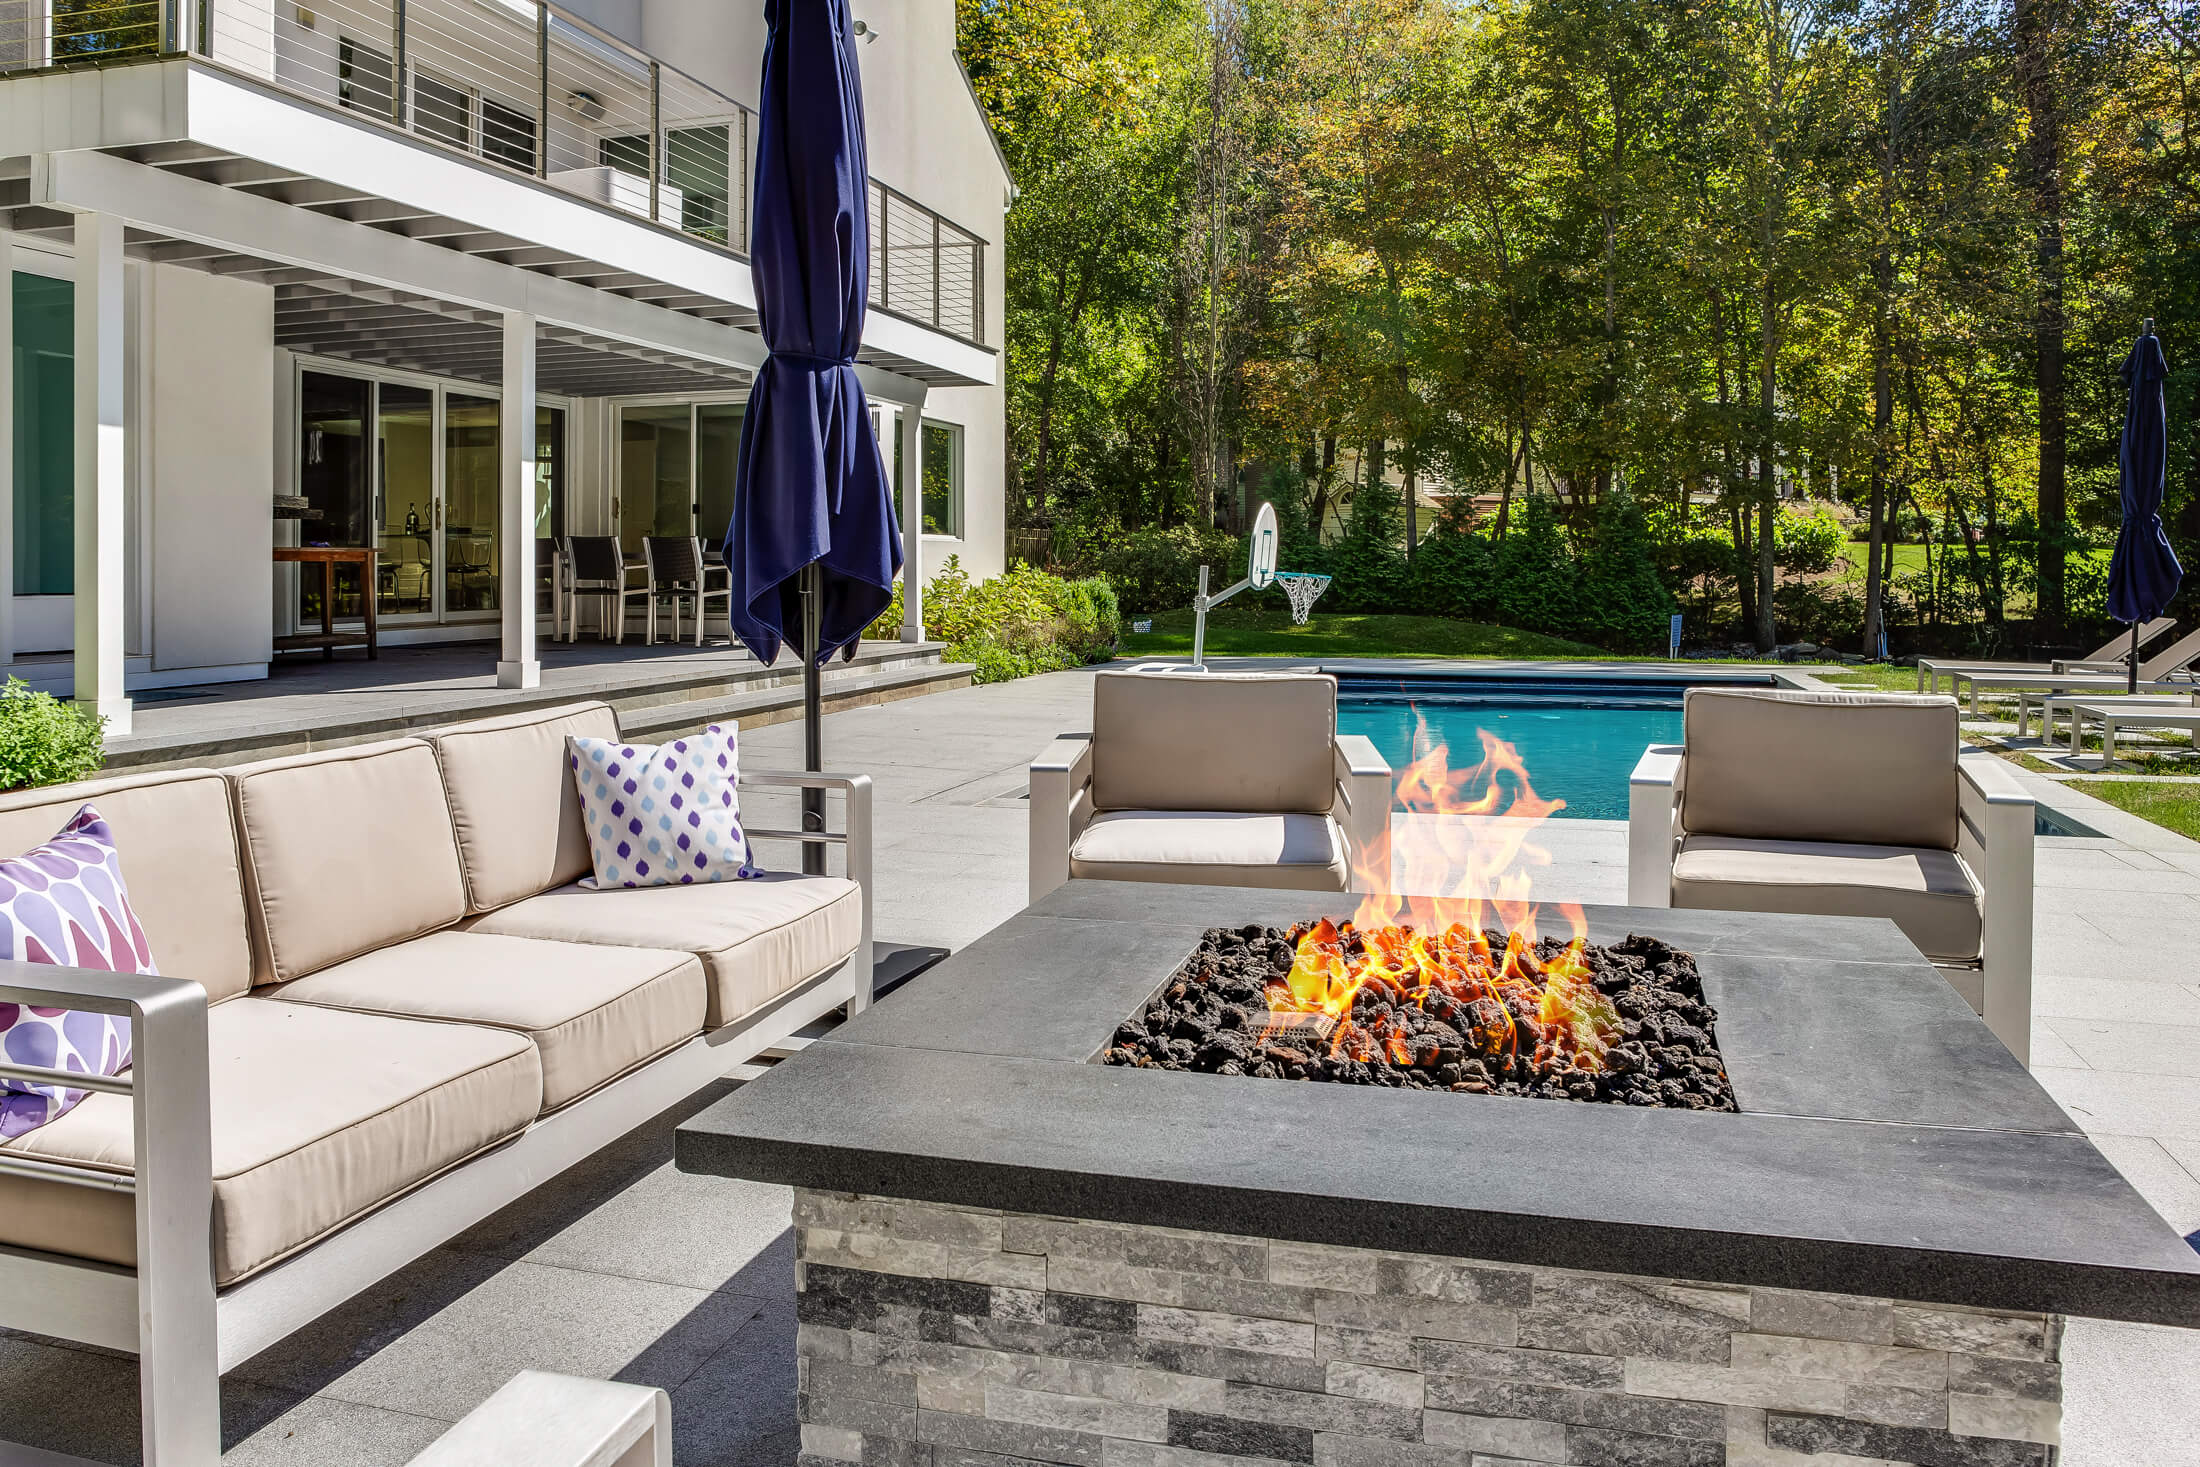 Outdoor seating area with fire pit and pool in background